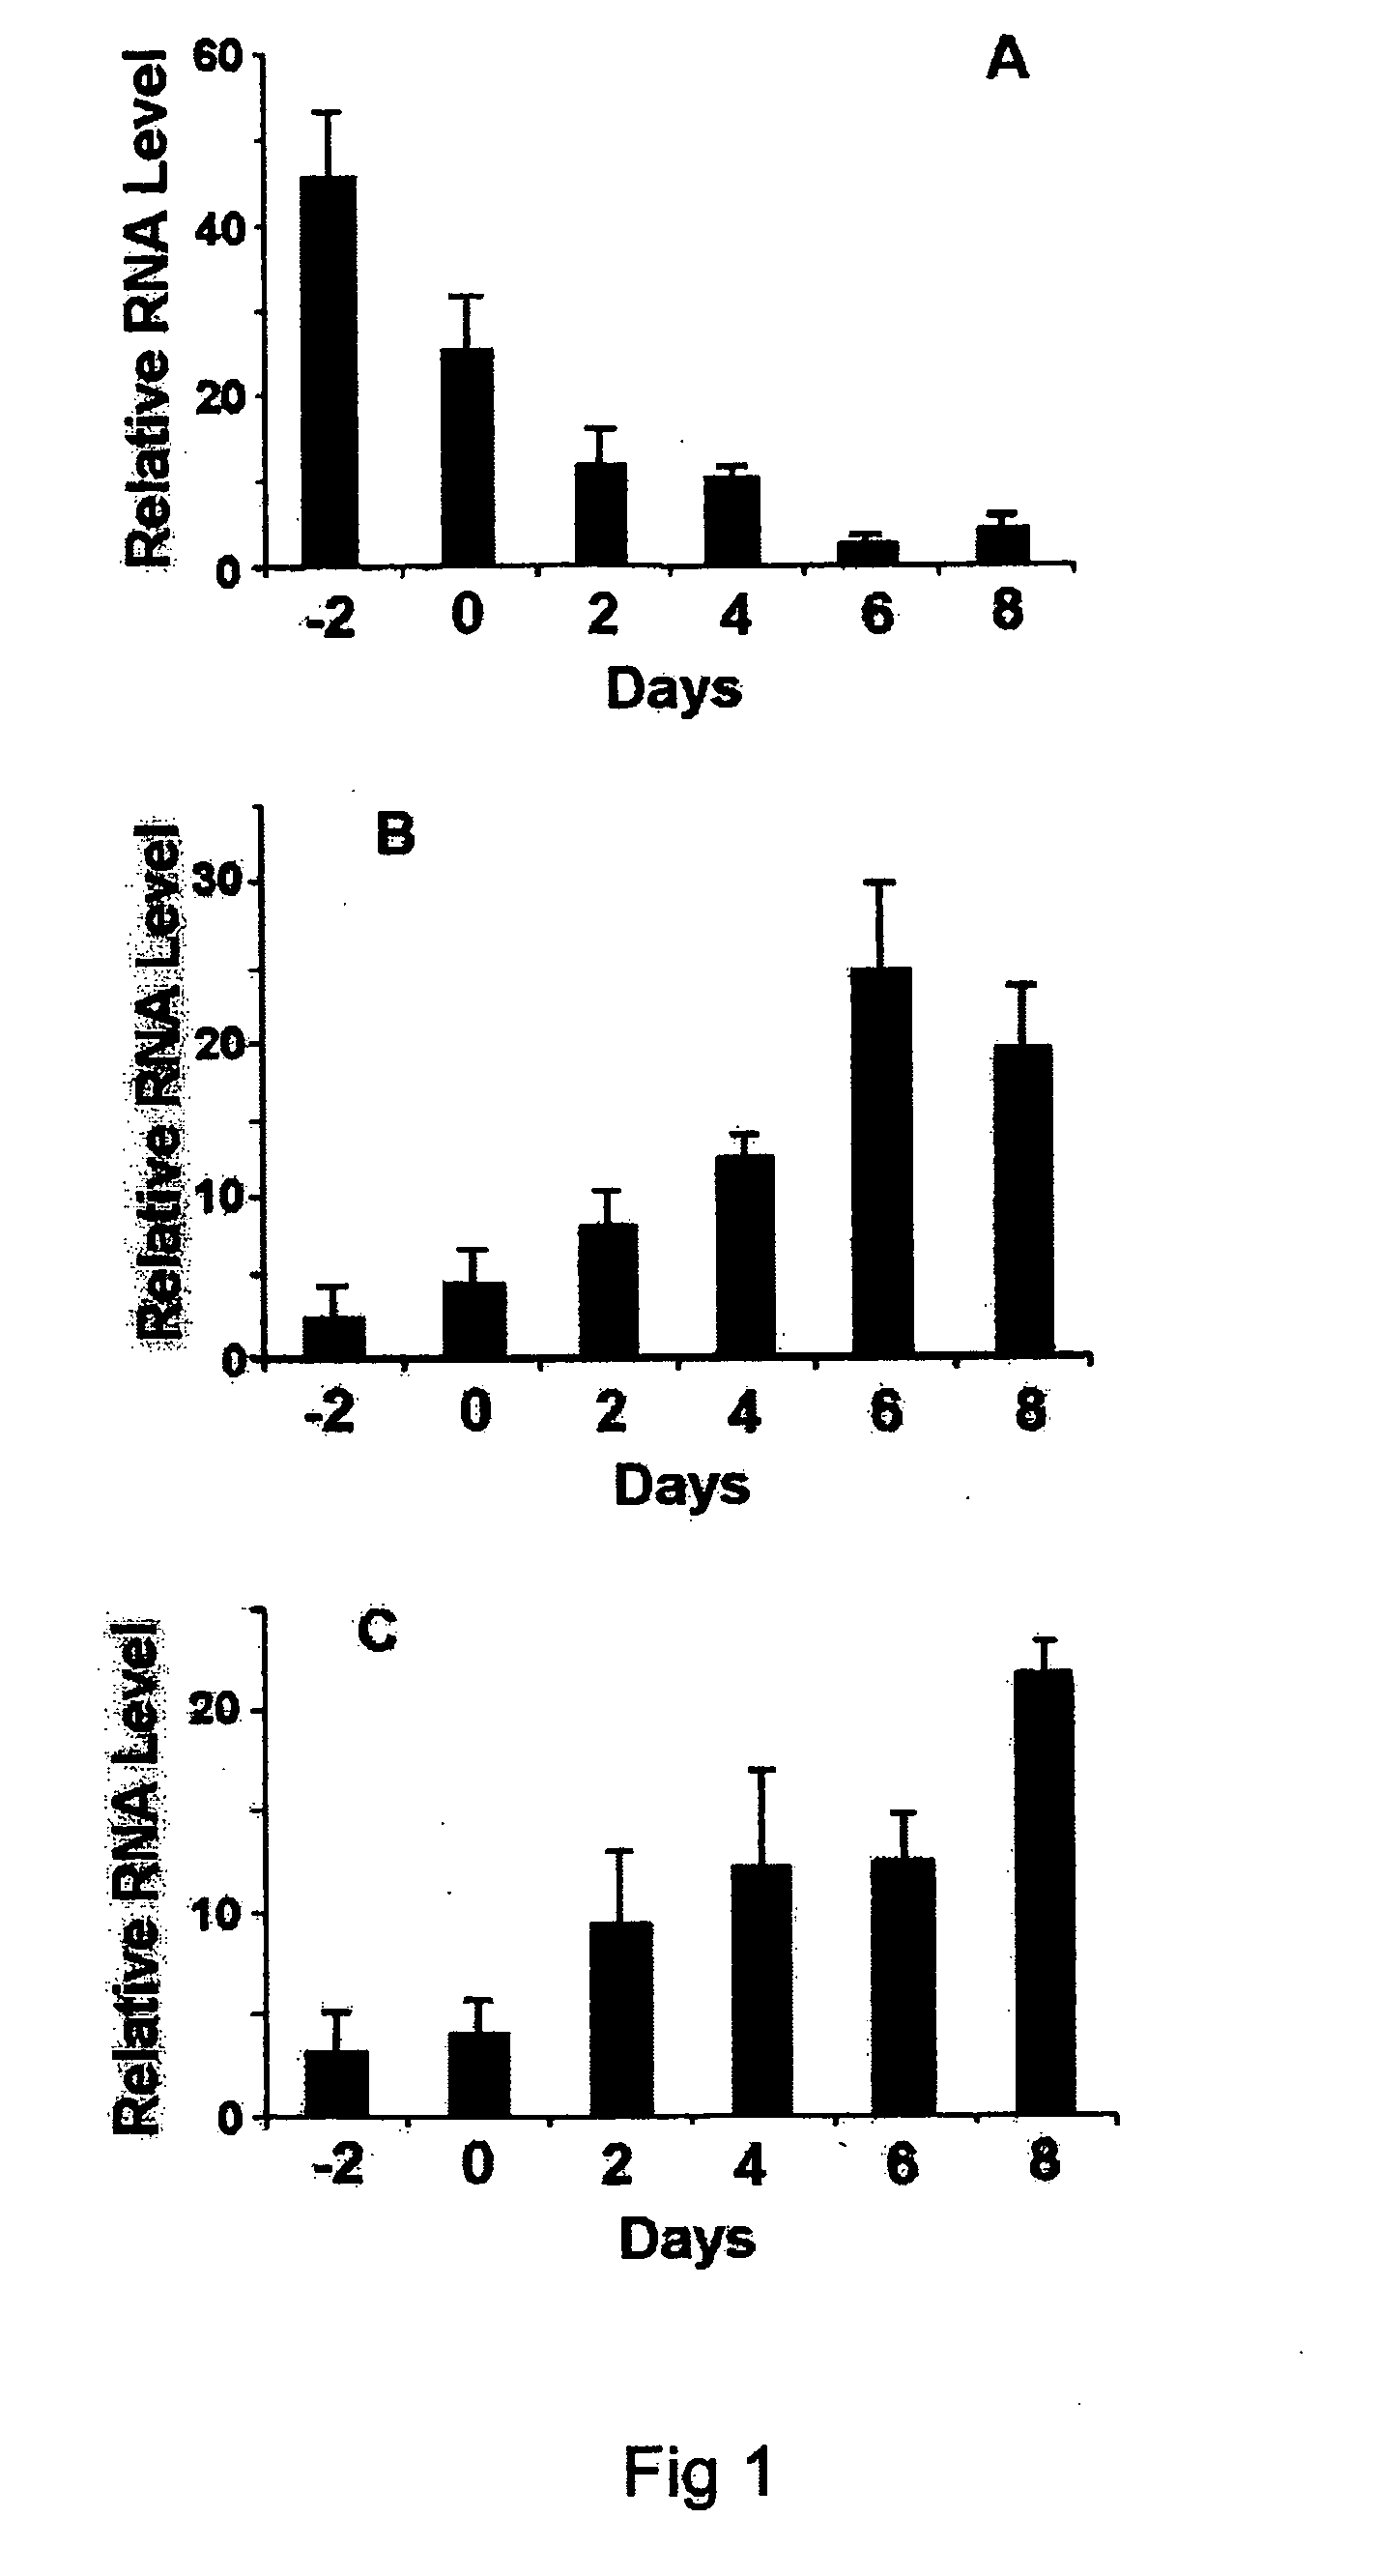 Inhibition of calcium-independent phospholipases A2beta or A2gamma inhibit hormone-induced differentiation of 3T3-L1 preadipocytes